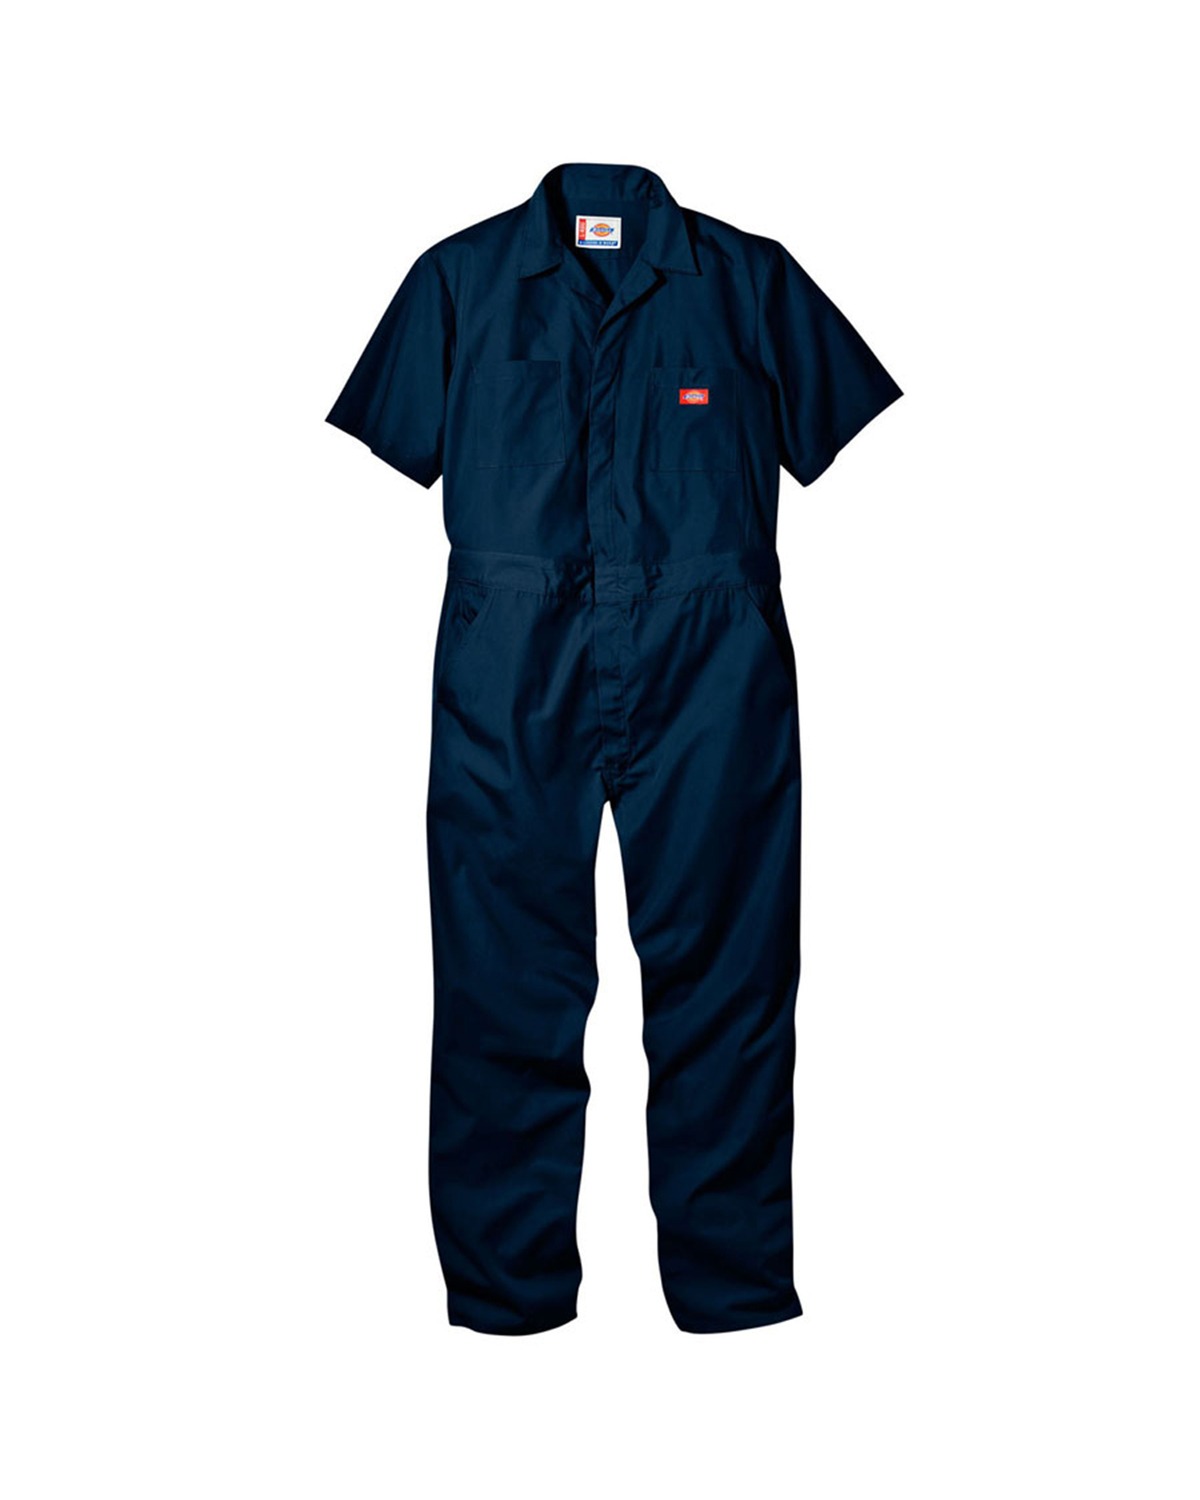 33999 Dickies 5 oz. Short-Sleeve Coverall